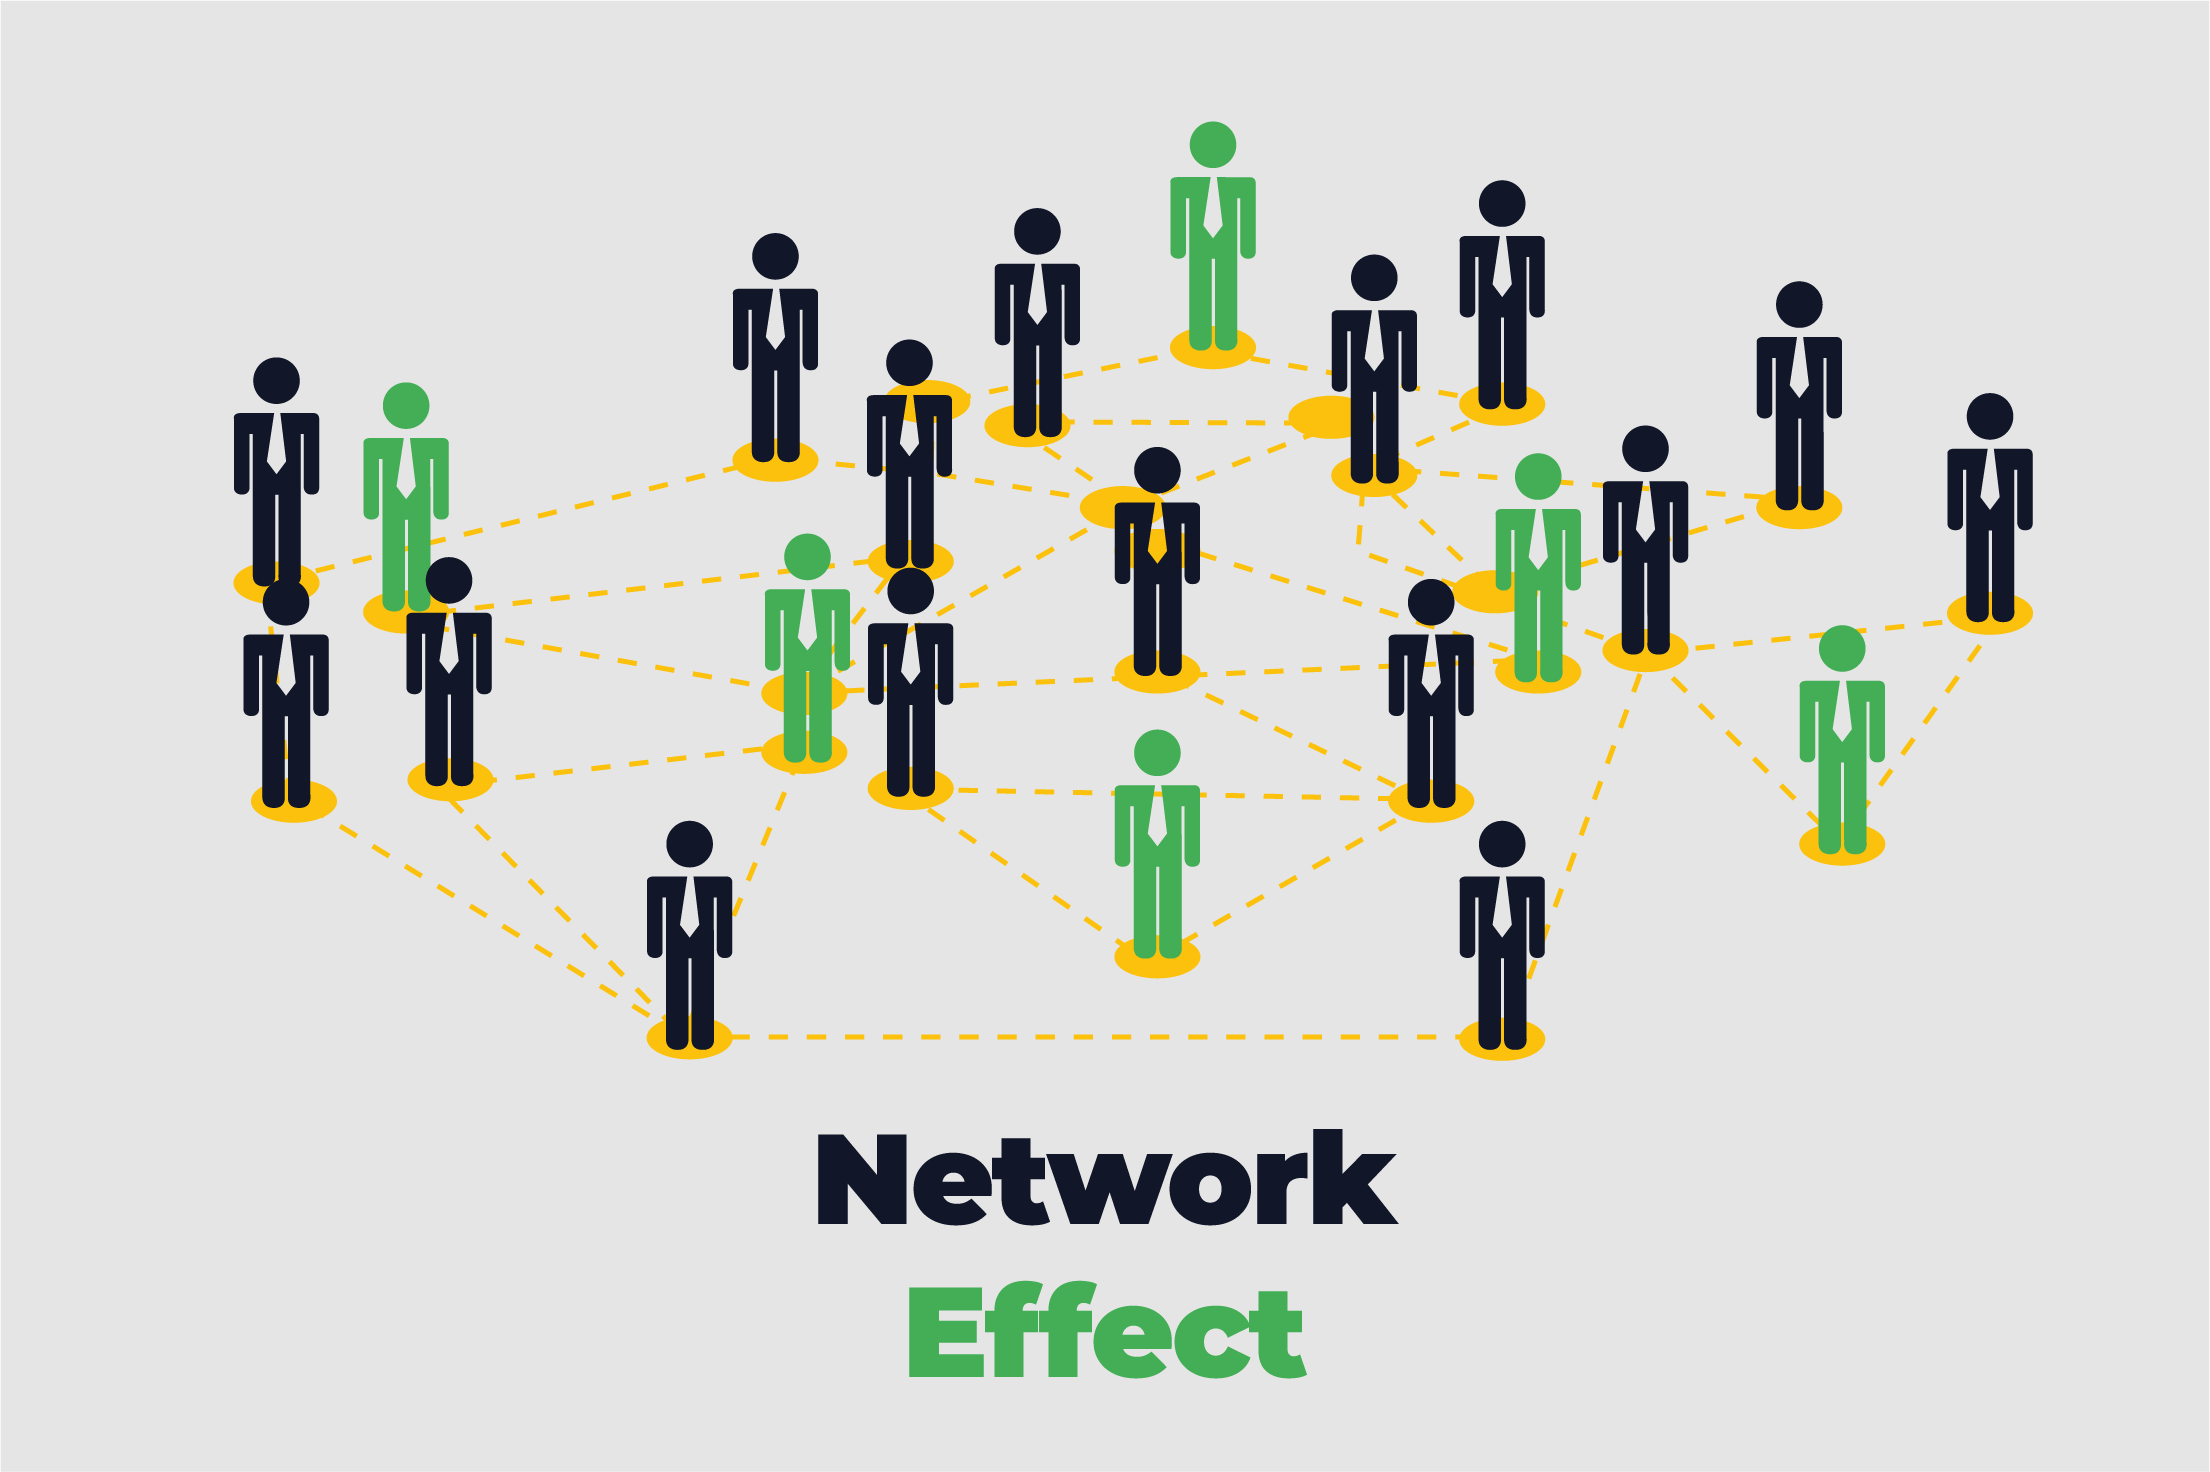 What are network effects?